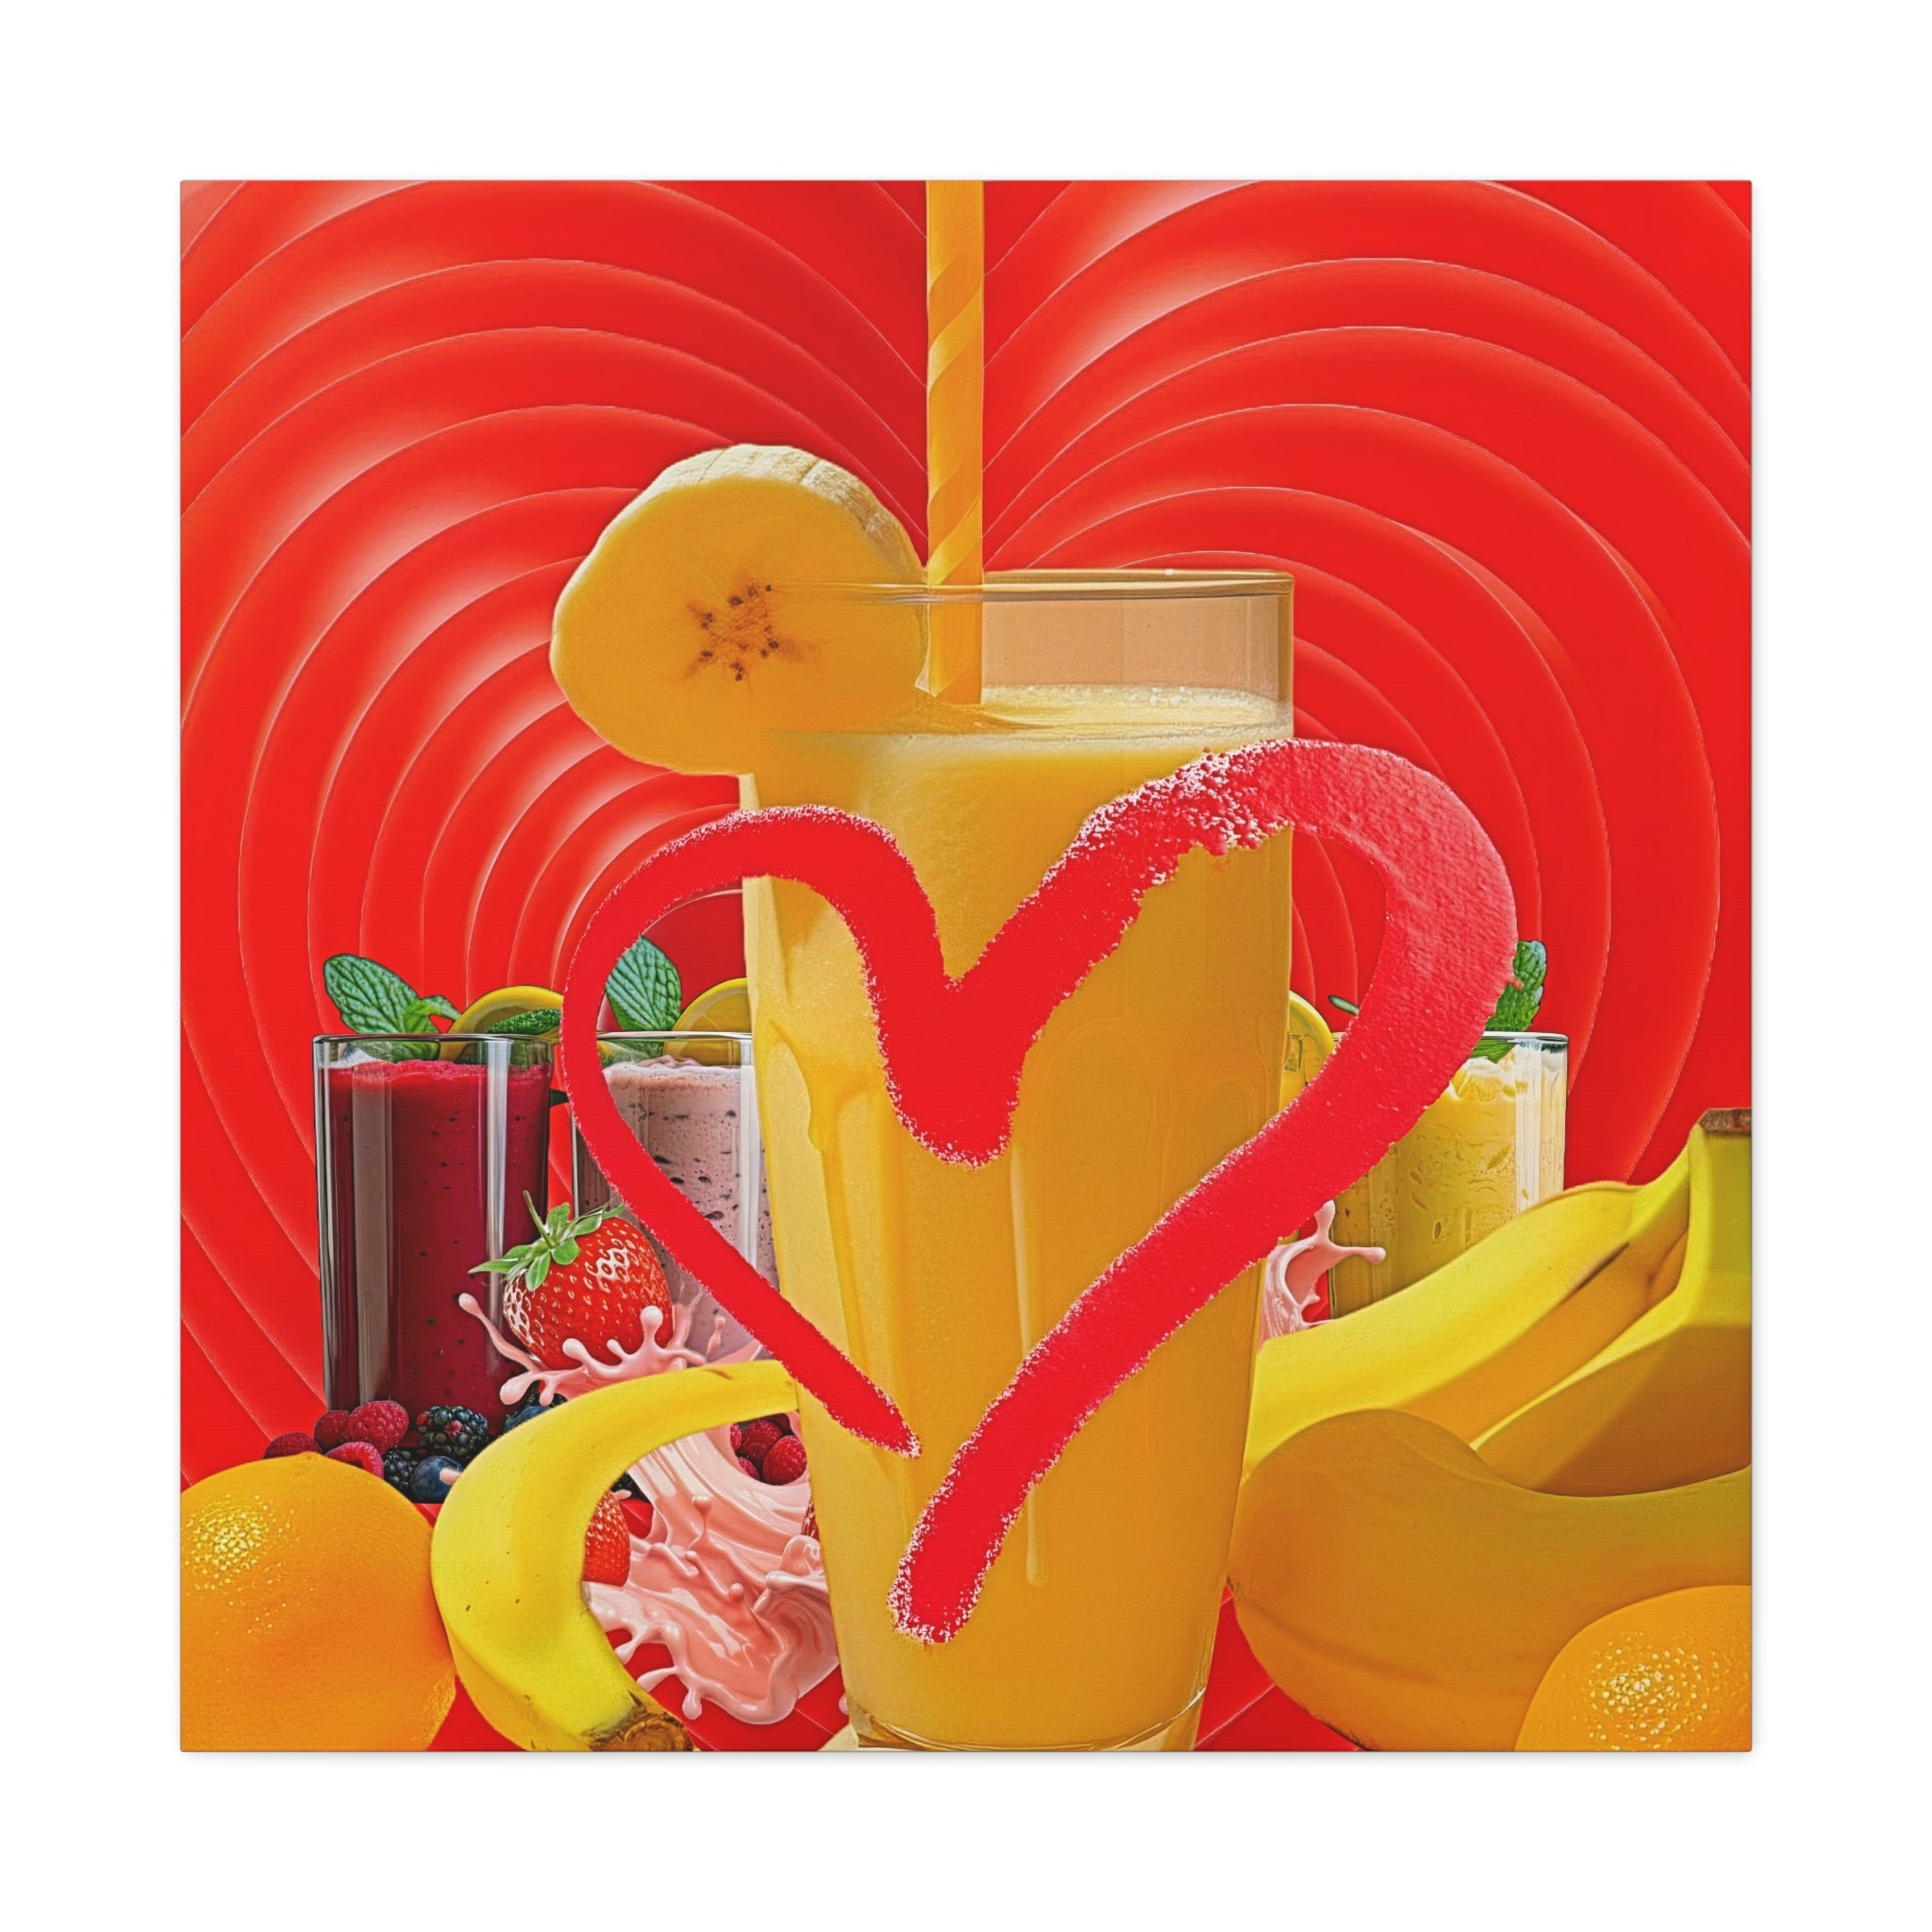 Wall Art LOVE SMOOTHIES Canvas Print Painting Original Giclee32X32  GW Love Nice Beauty Fun Design Fit Hot House Home Office Gift Ready Hang Living